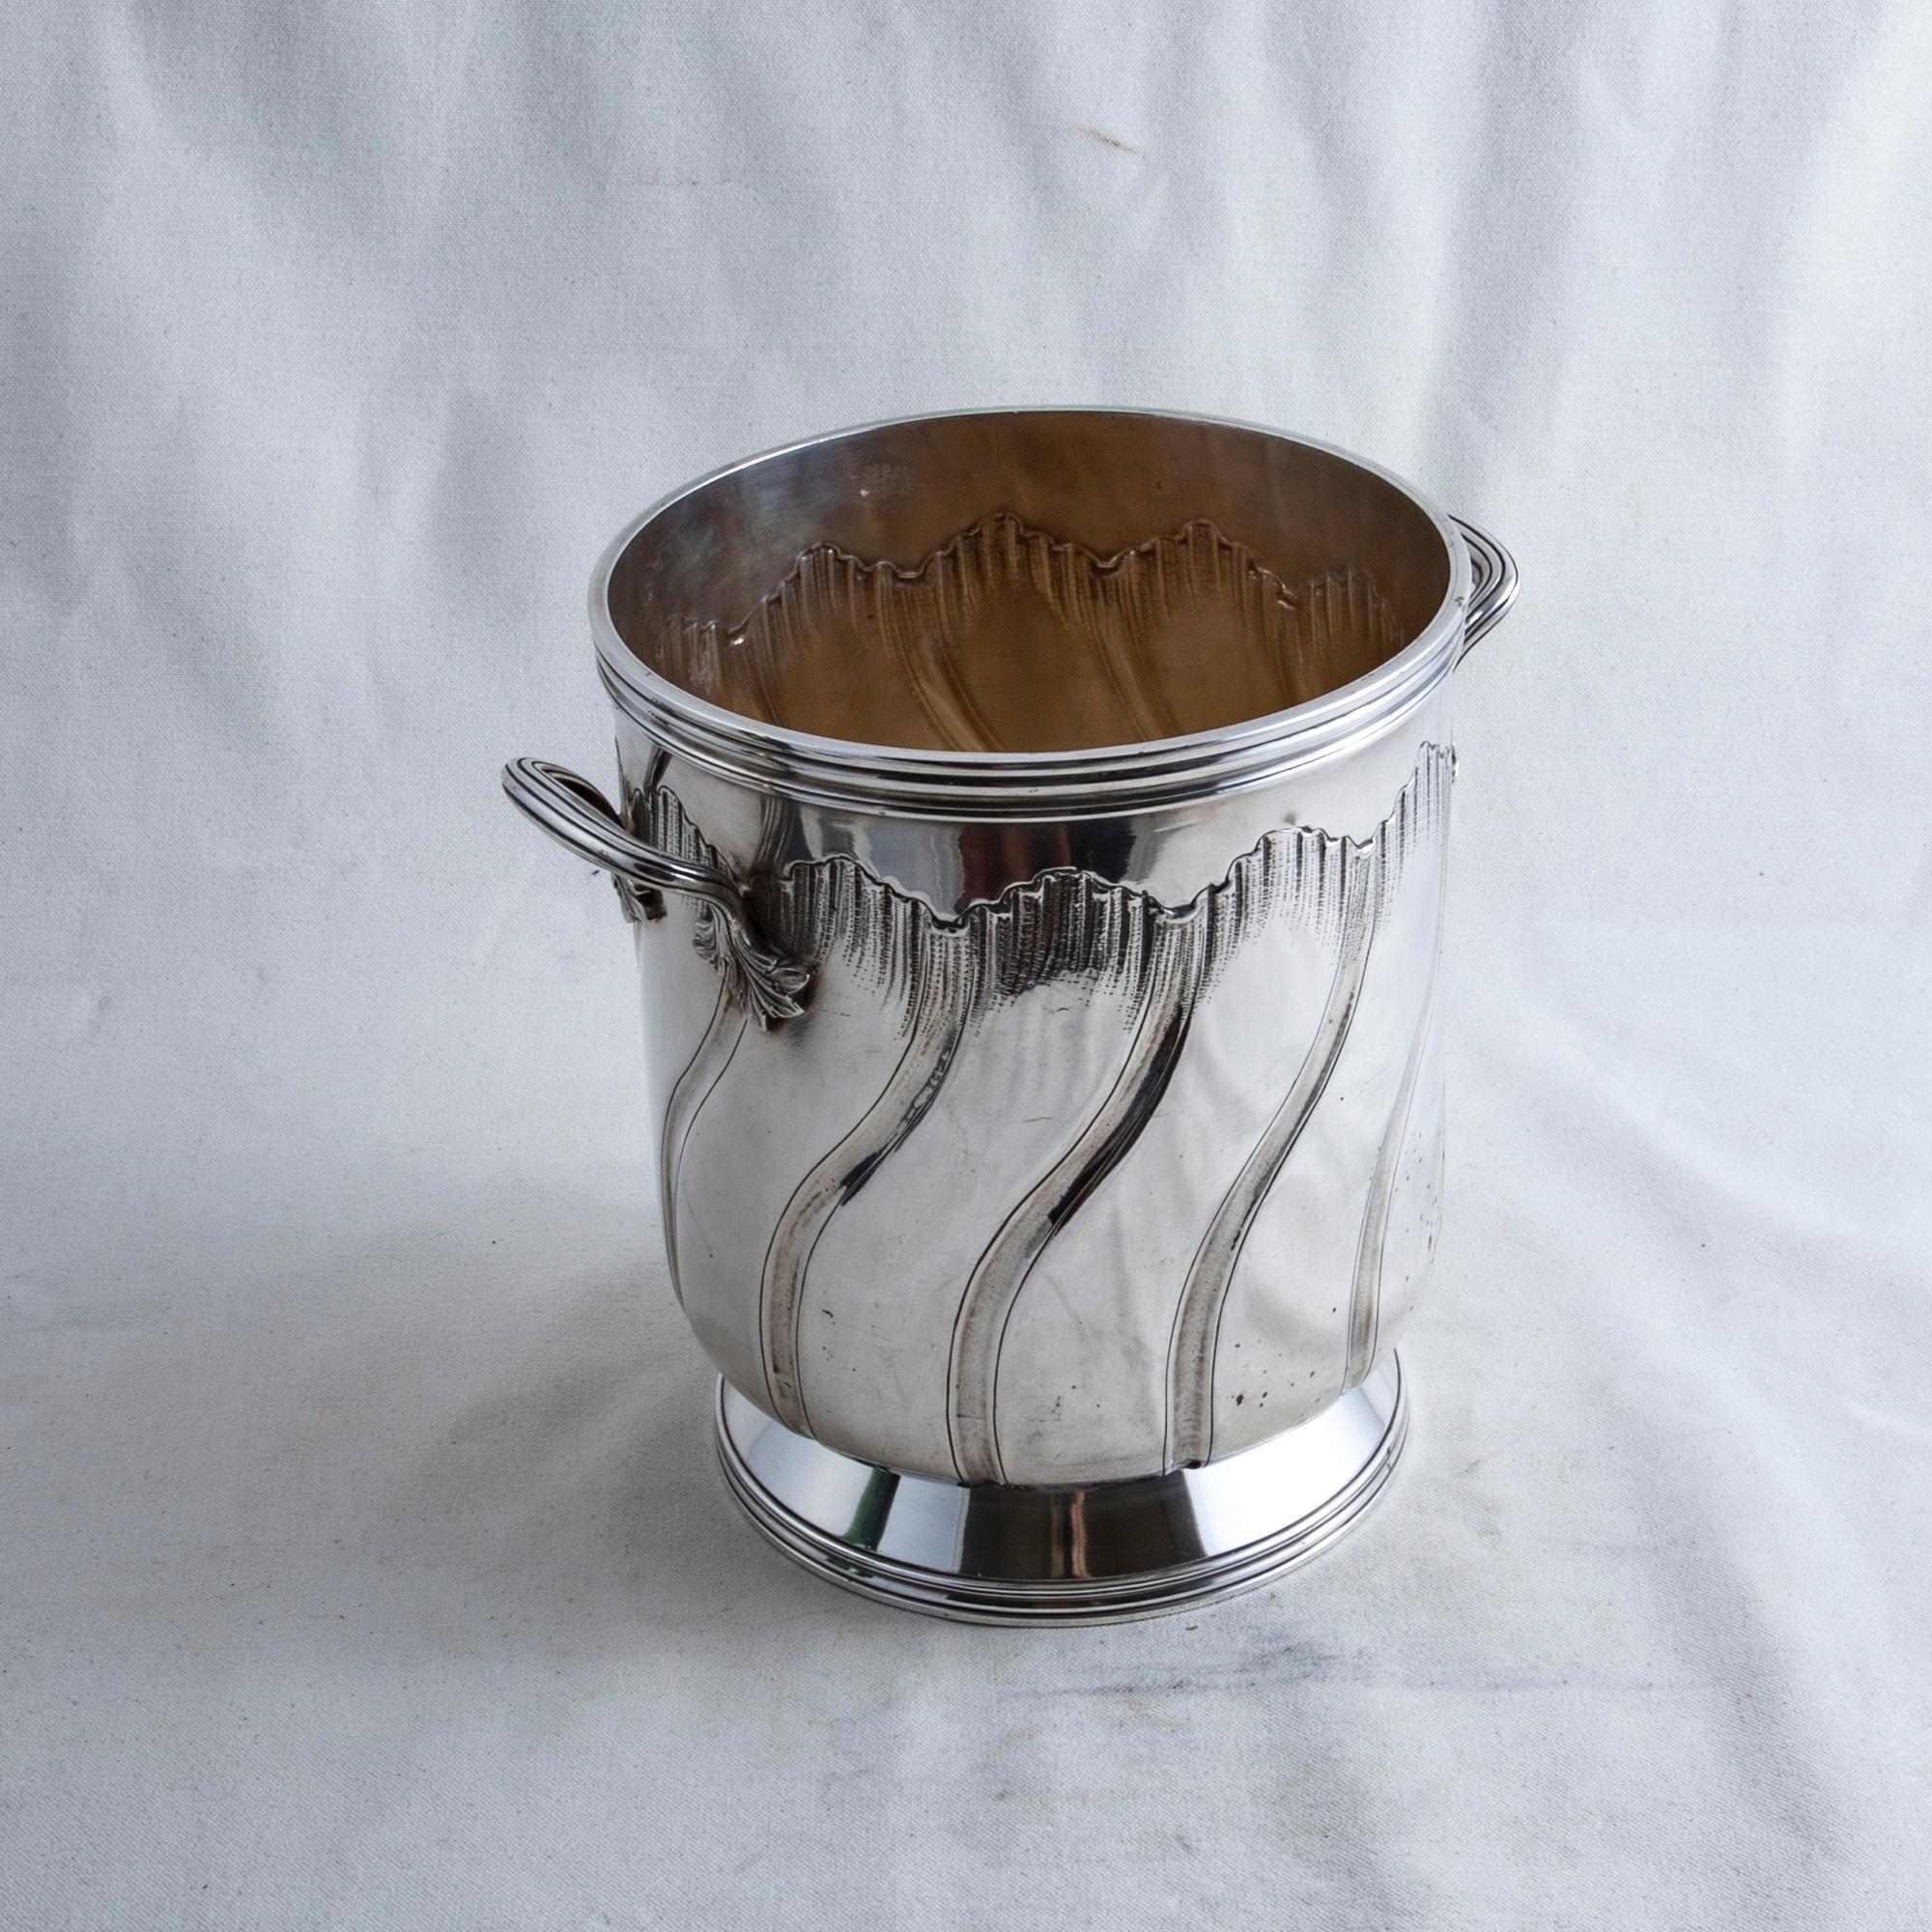 This early twentieth century French silver plate champagne bucket features a classic Louis XV style spiraling scallop on the sides. The bucket is appointed with a handle on each side detailed with leaves and rests on a footed base. The bottom of the